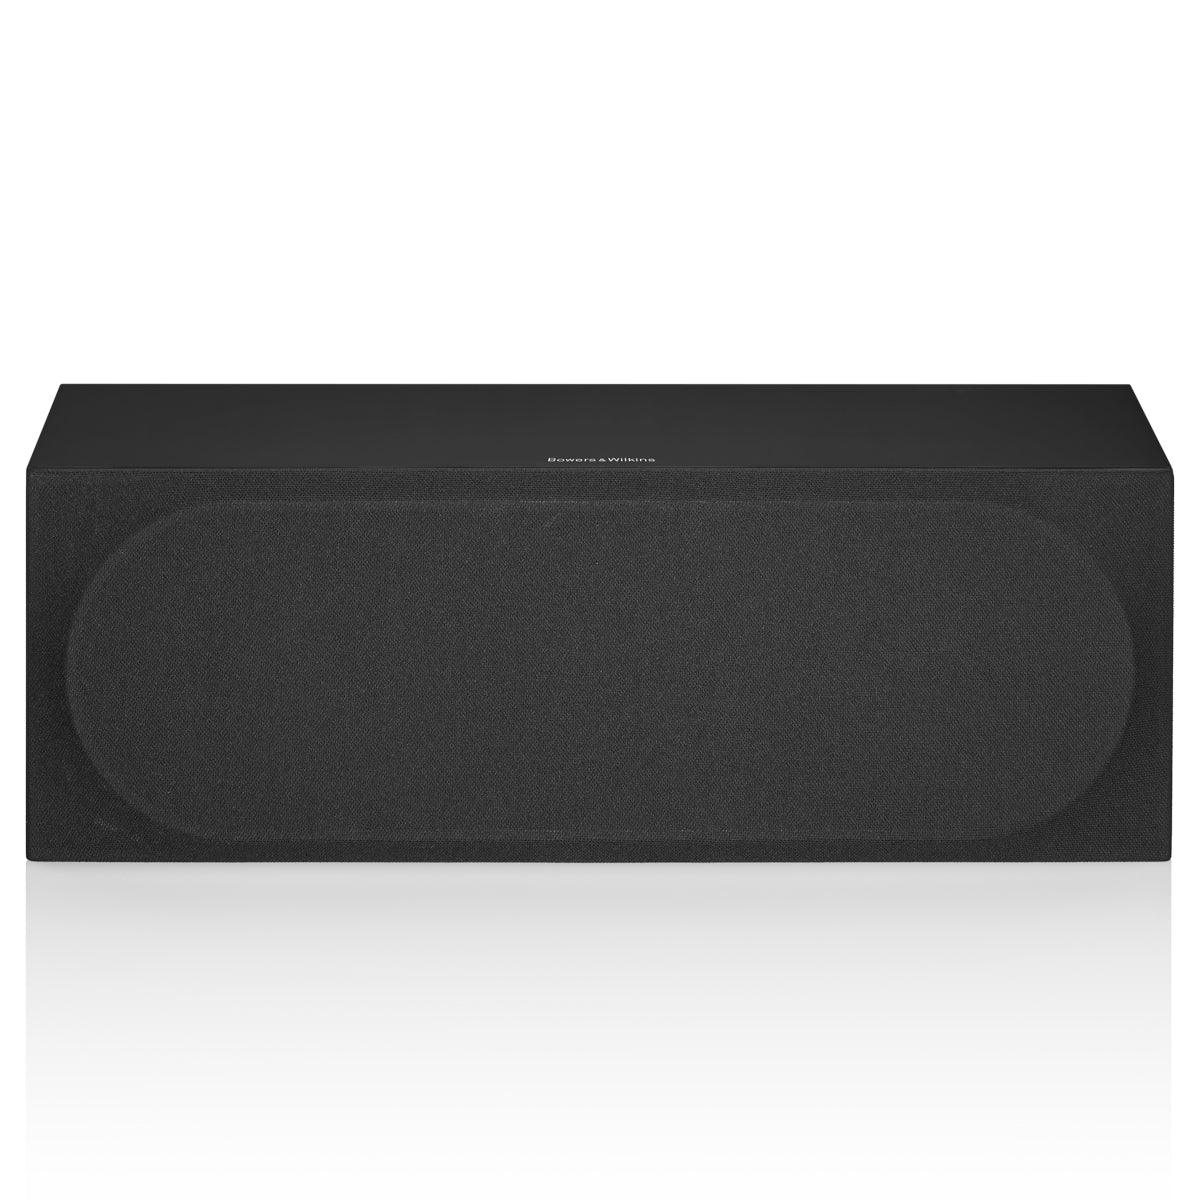 Bowers & Wilkins HTM72 S3 2-Way Centre-Channel Speaker - Black - The Audio Experts